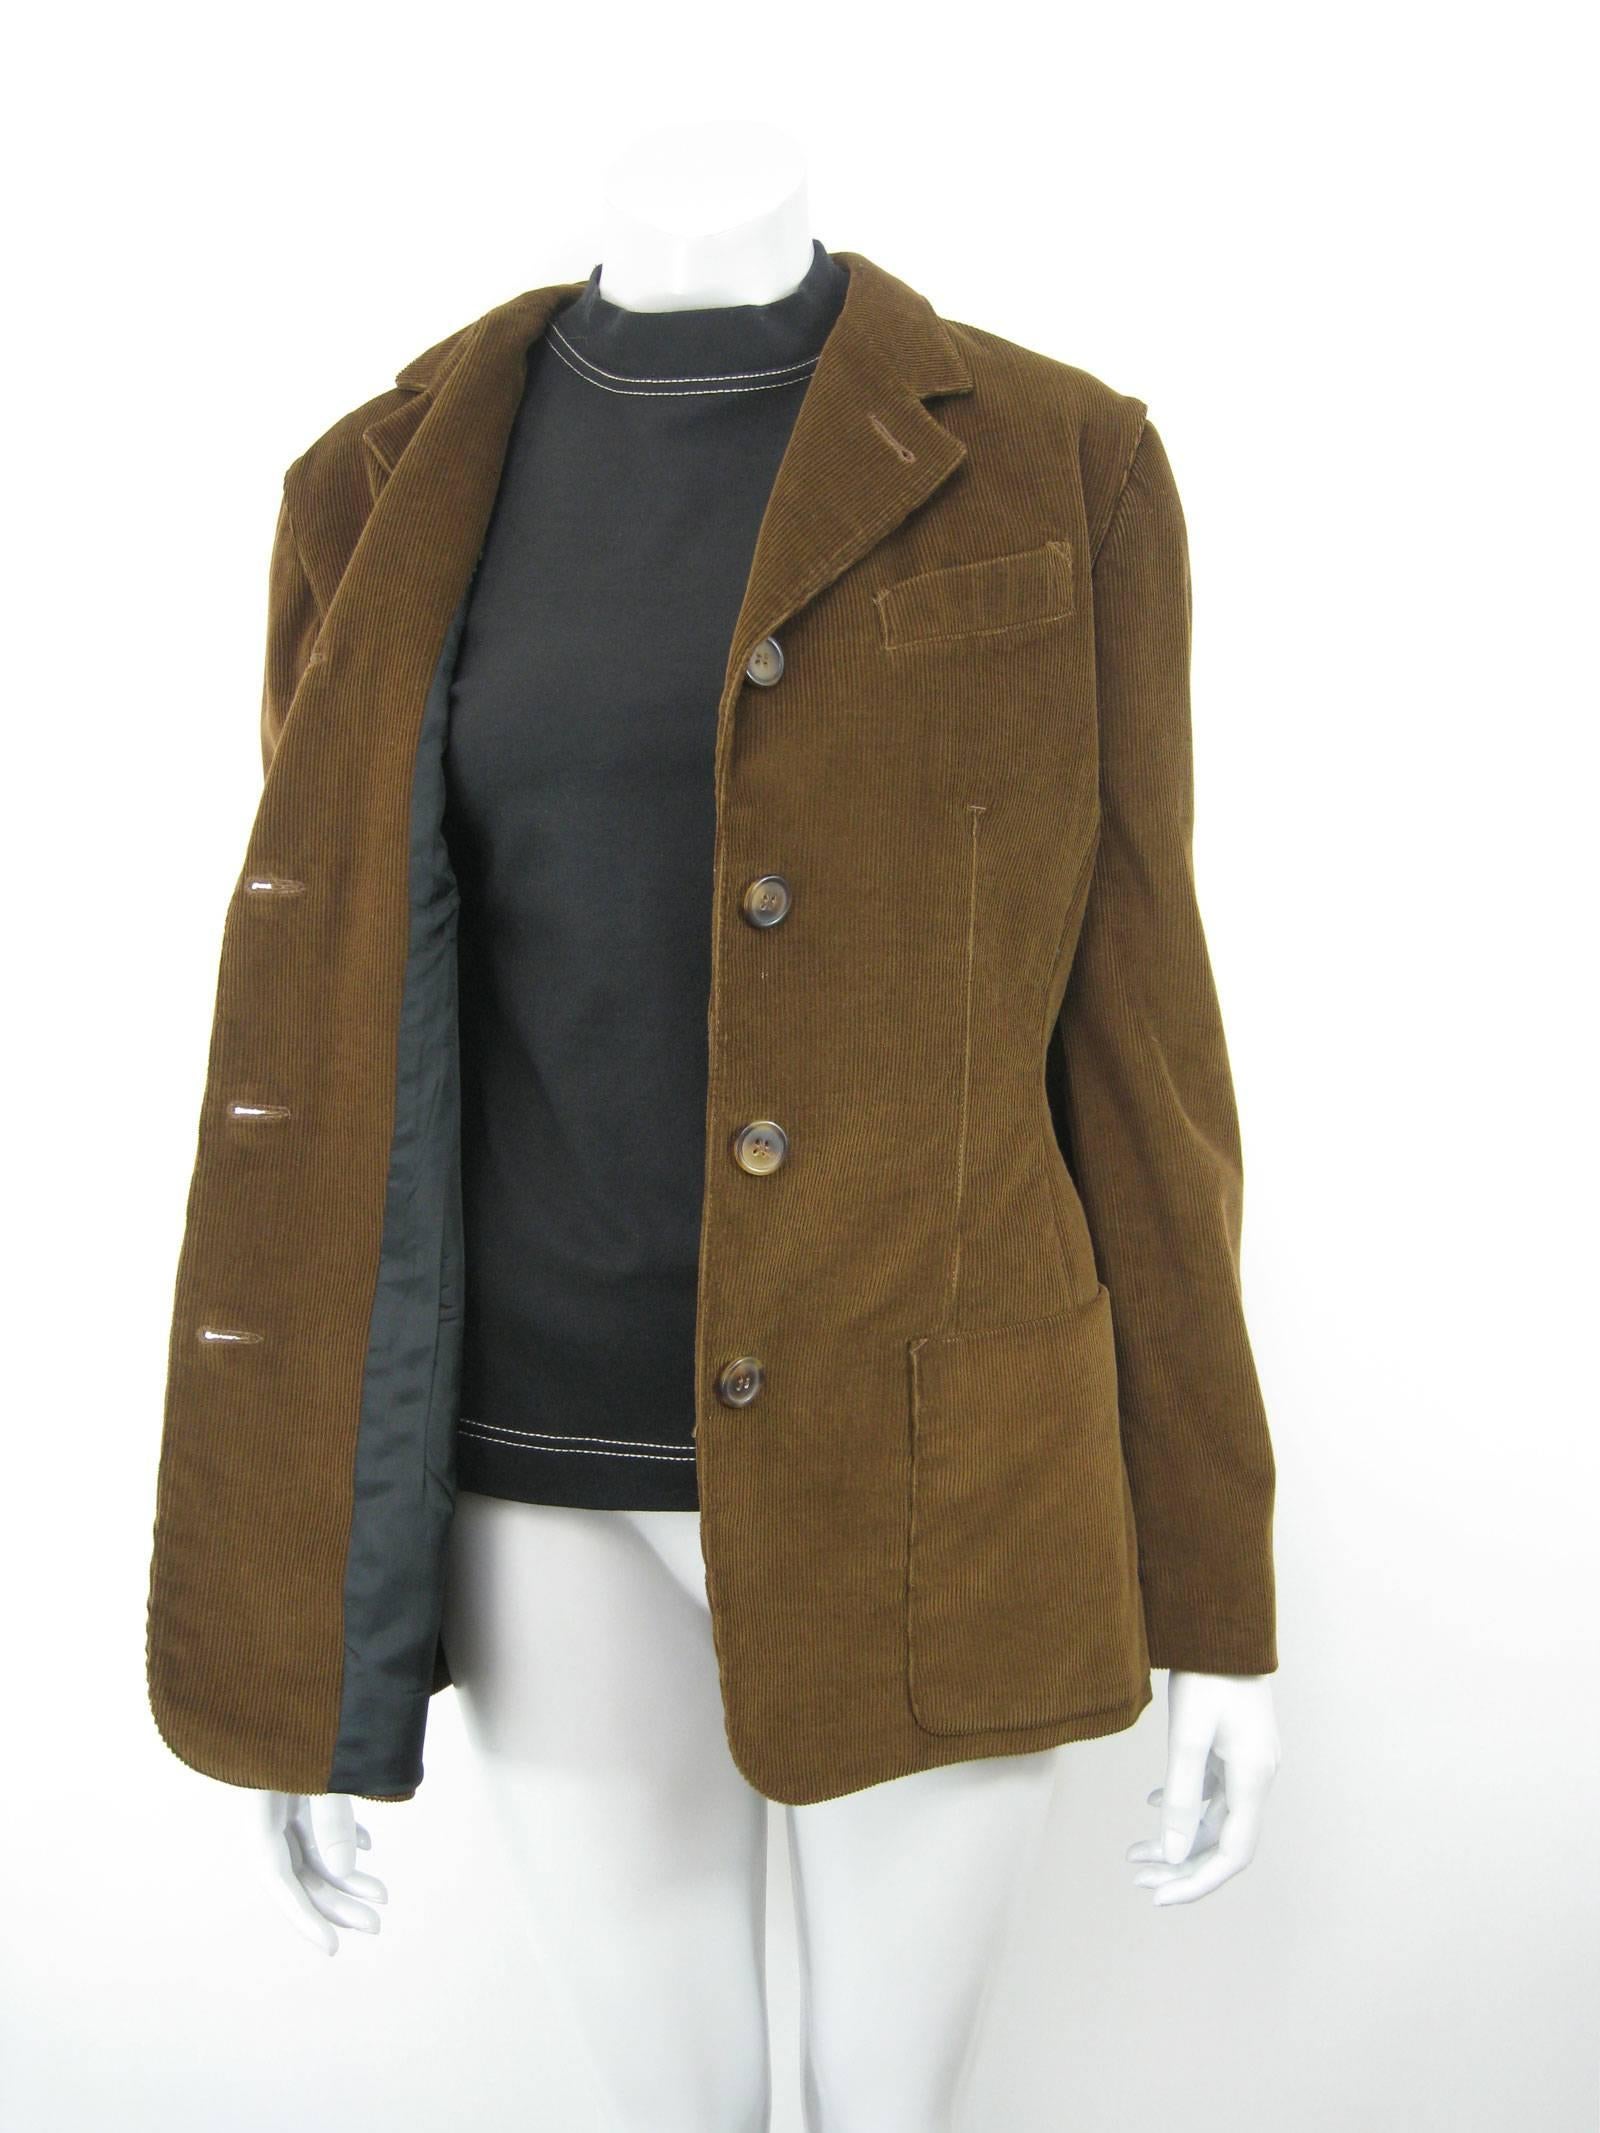 Vintage Jean-Paul Gaultier jacket/shirt/vest 2 piece.
Dark cinnamon-brown corduroy. 
Sleeves attached to a high-neck black stretch shirt.
Vest is separate piece (both can be worn separately). 
Vest has five tortoise shell buttons, two outside